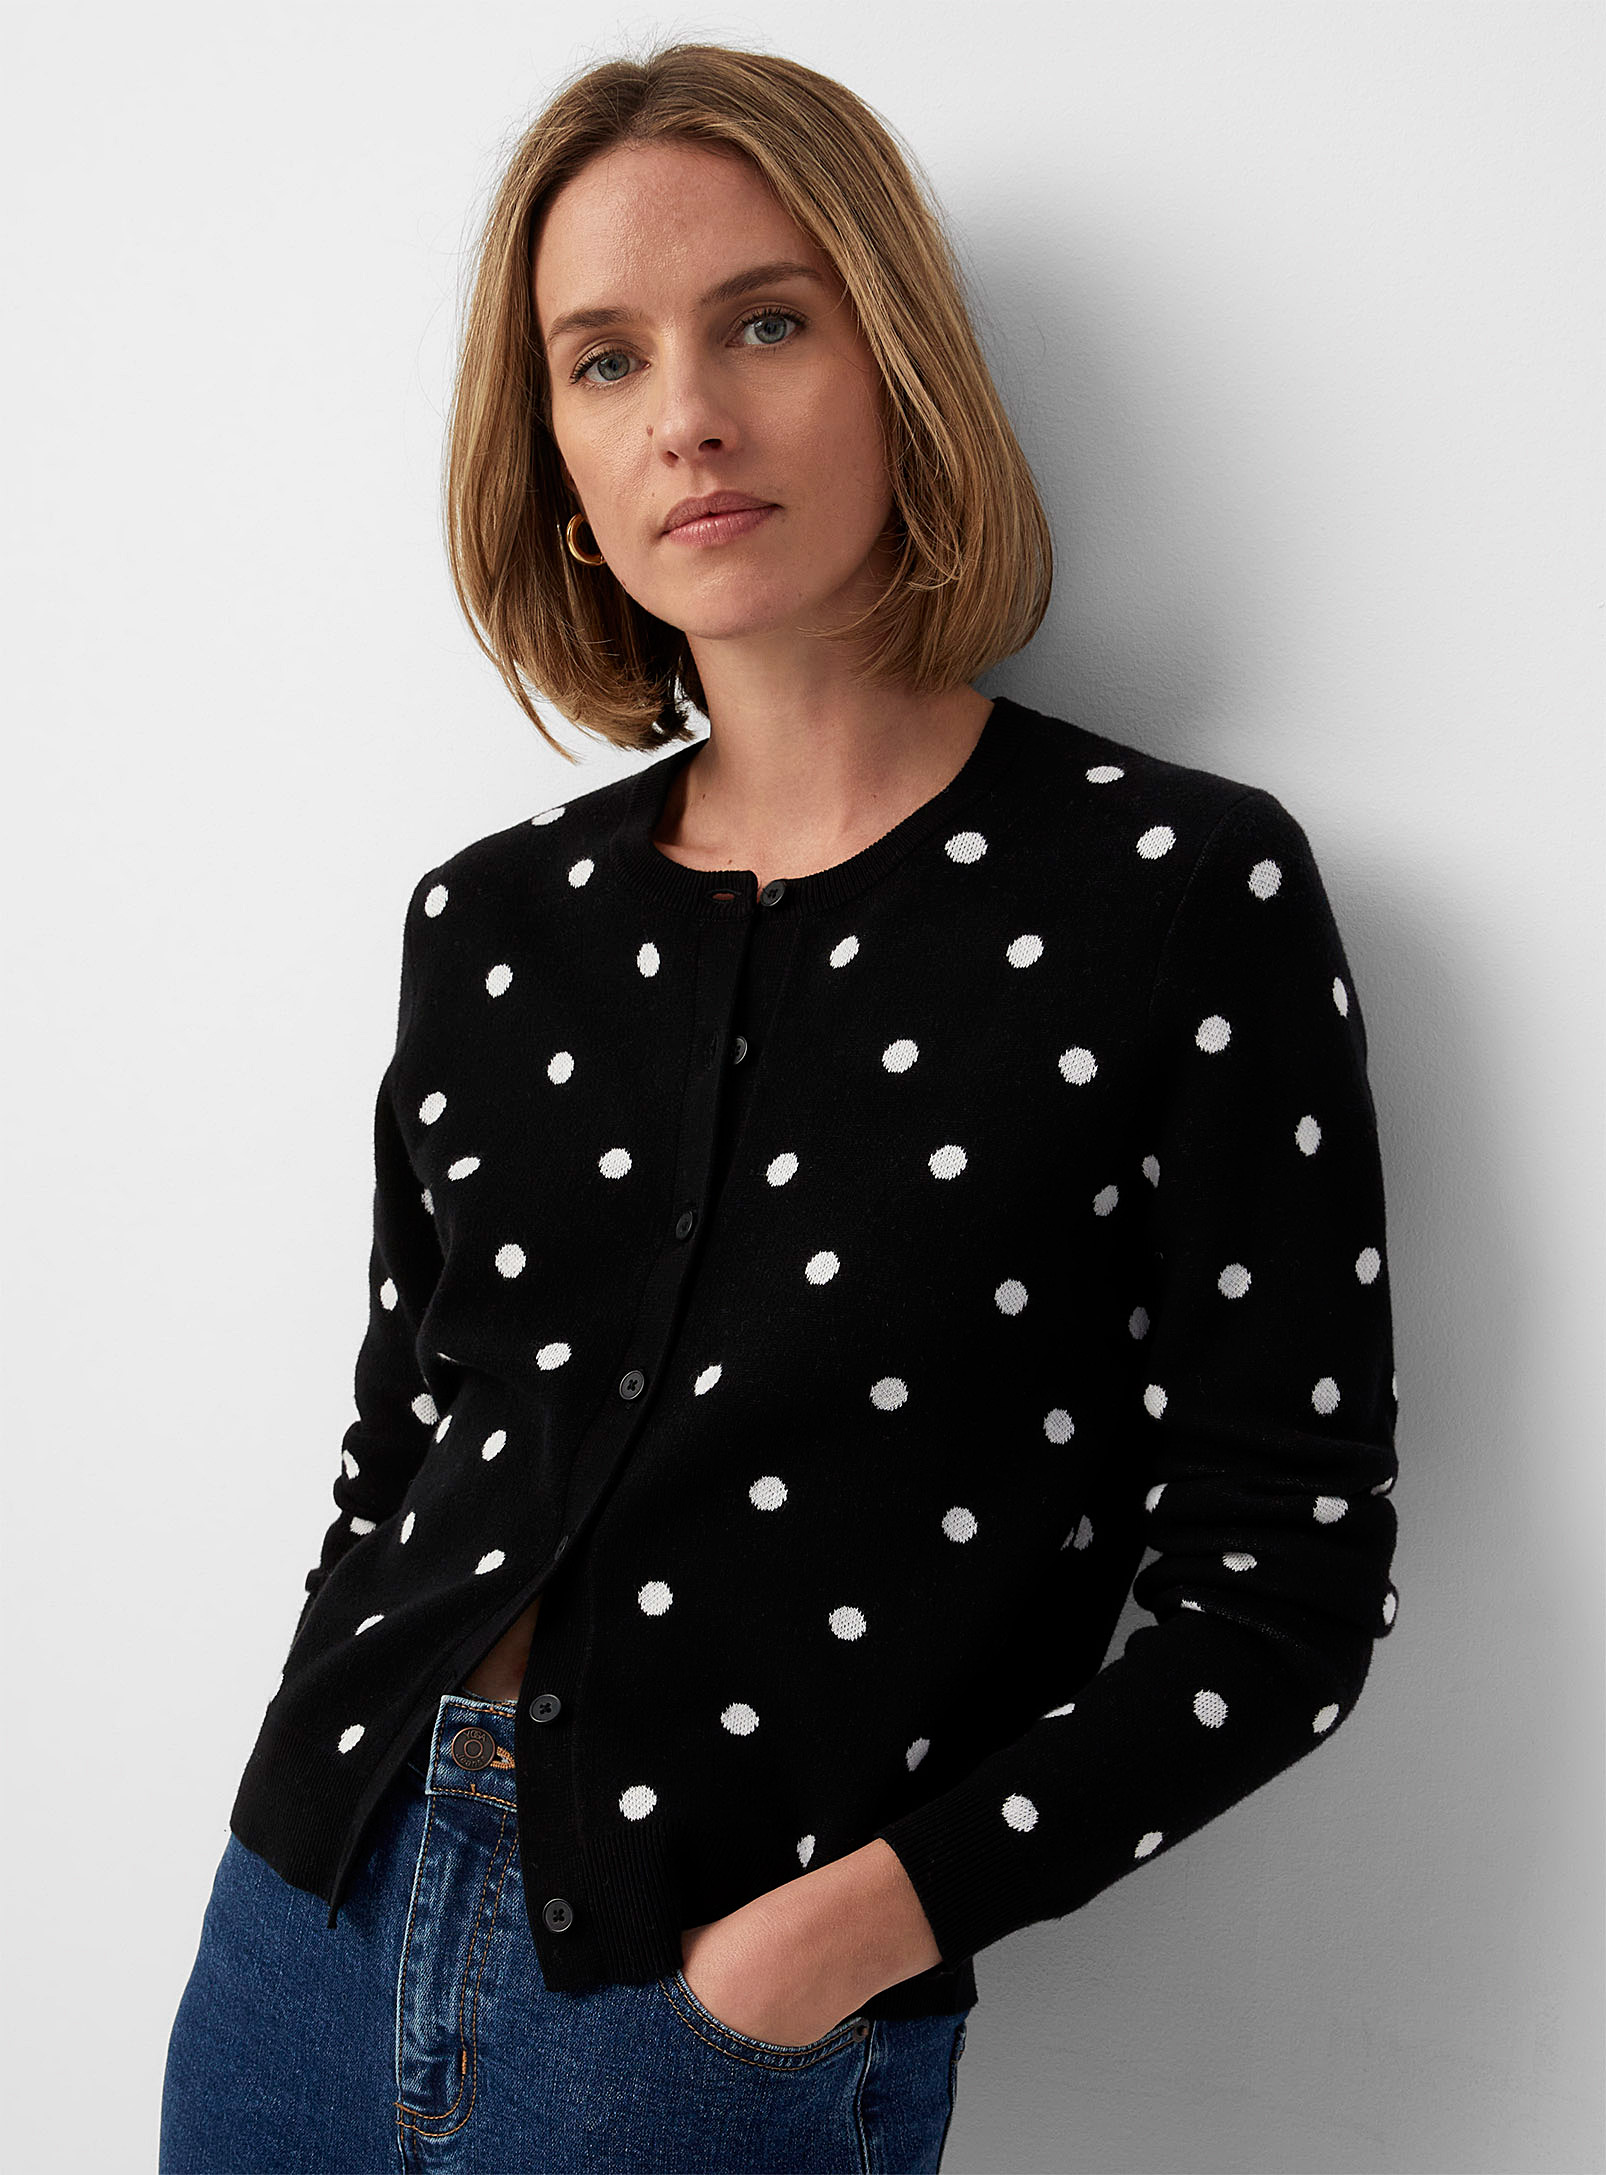 Contemporaine Charming Jacquard Cardigan In Patterned Black